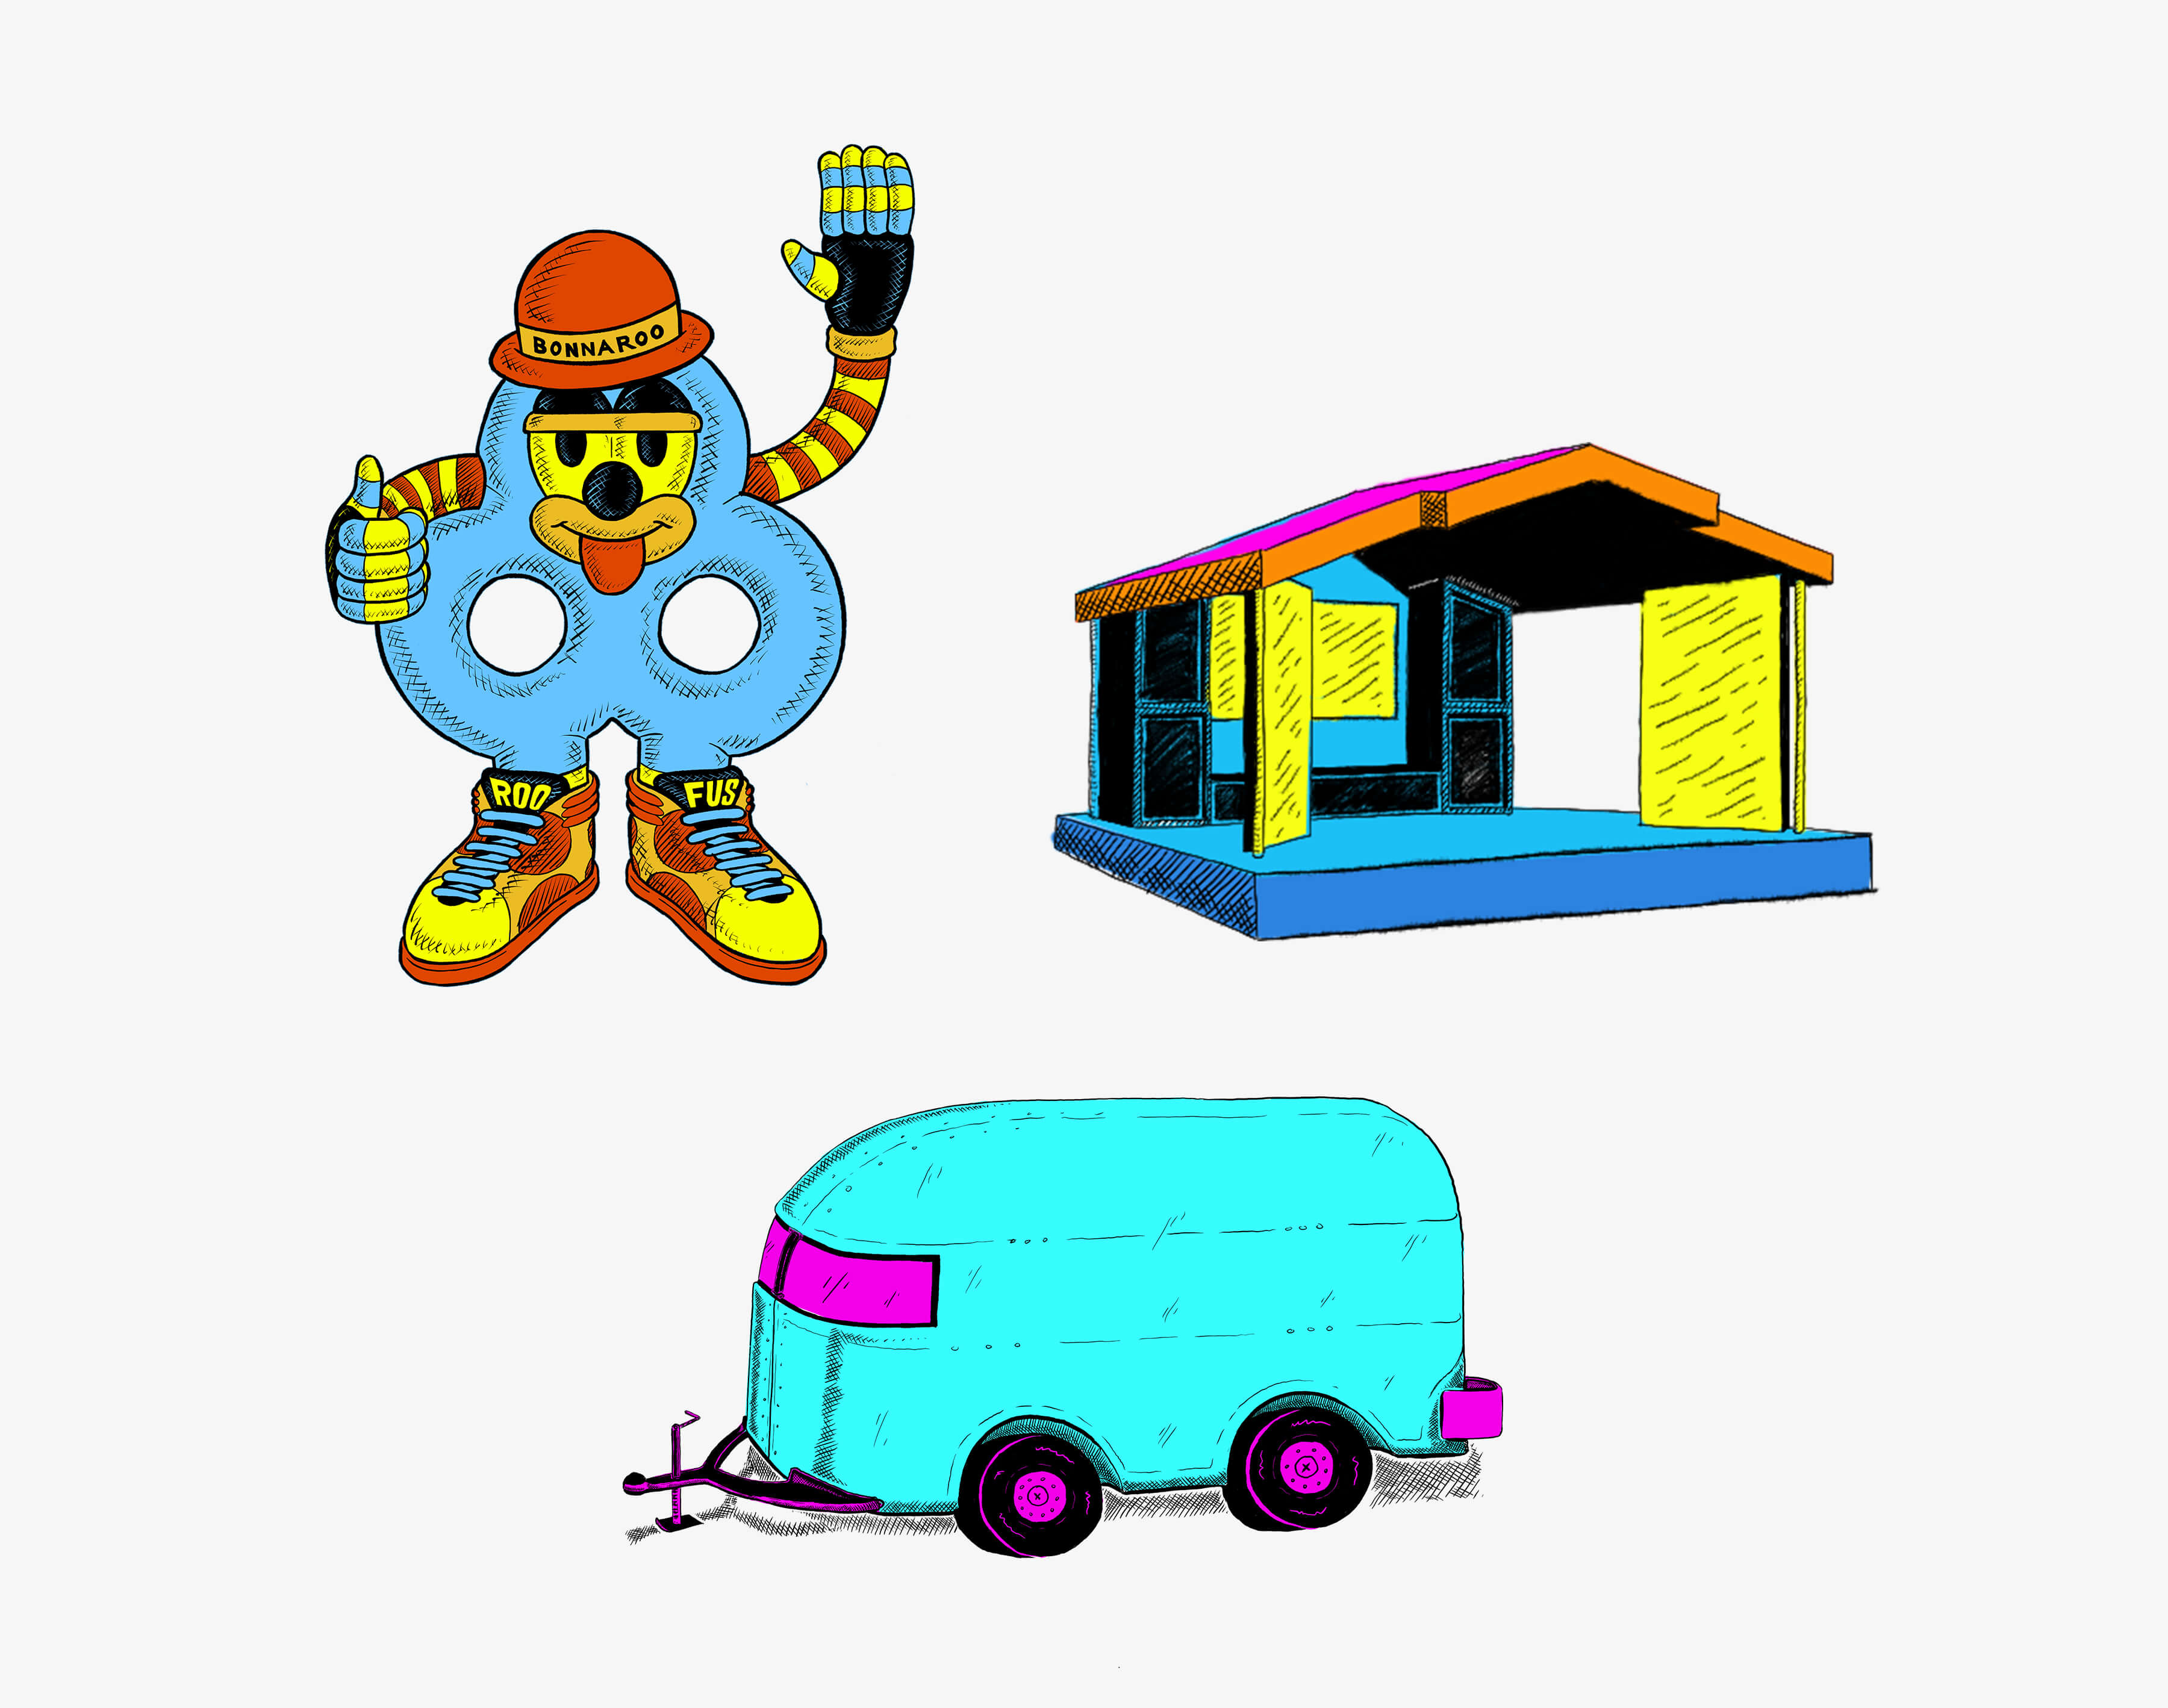 Illustrated Bonnaroo elements featuring Roofus, the Main Stage, and an RV.